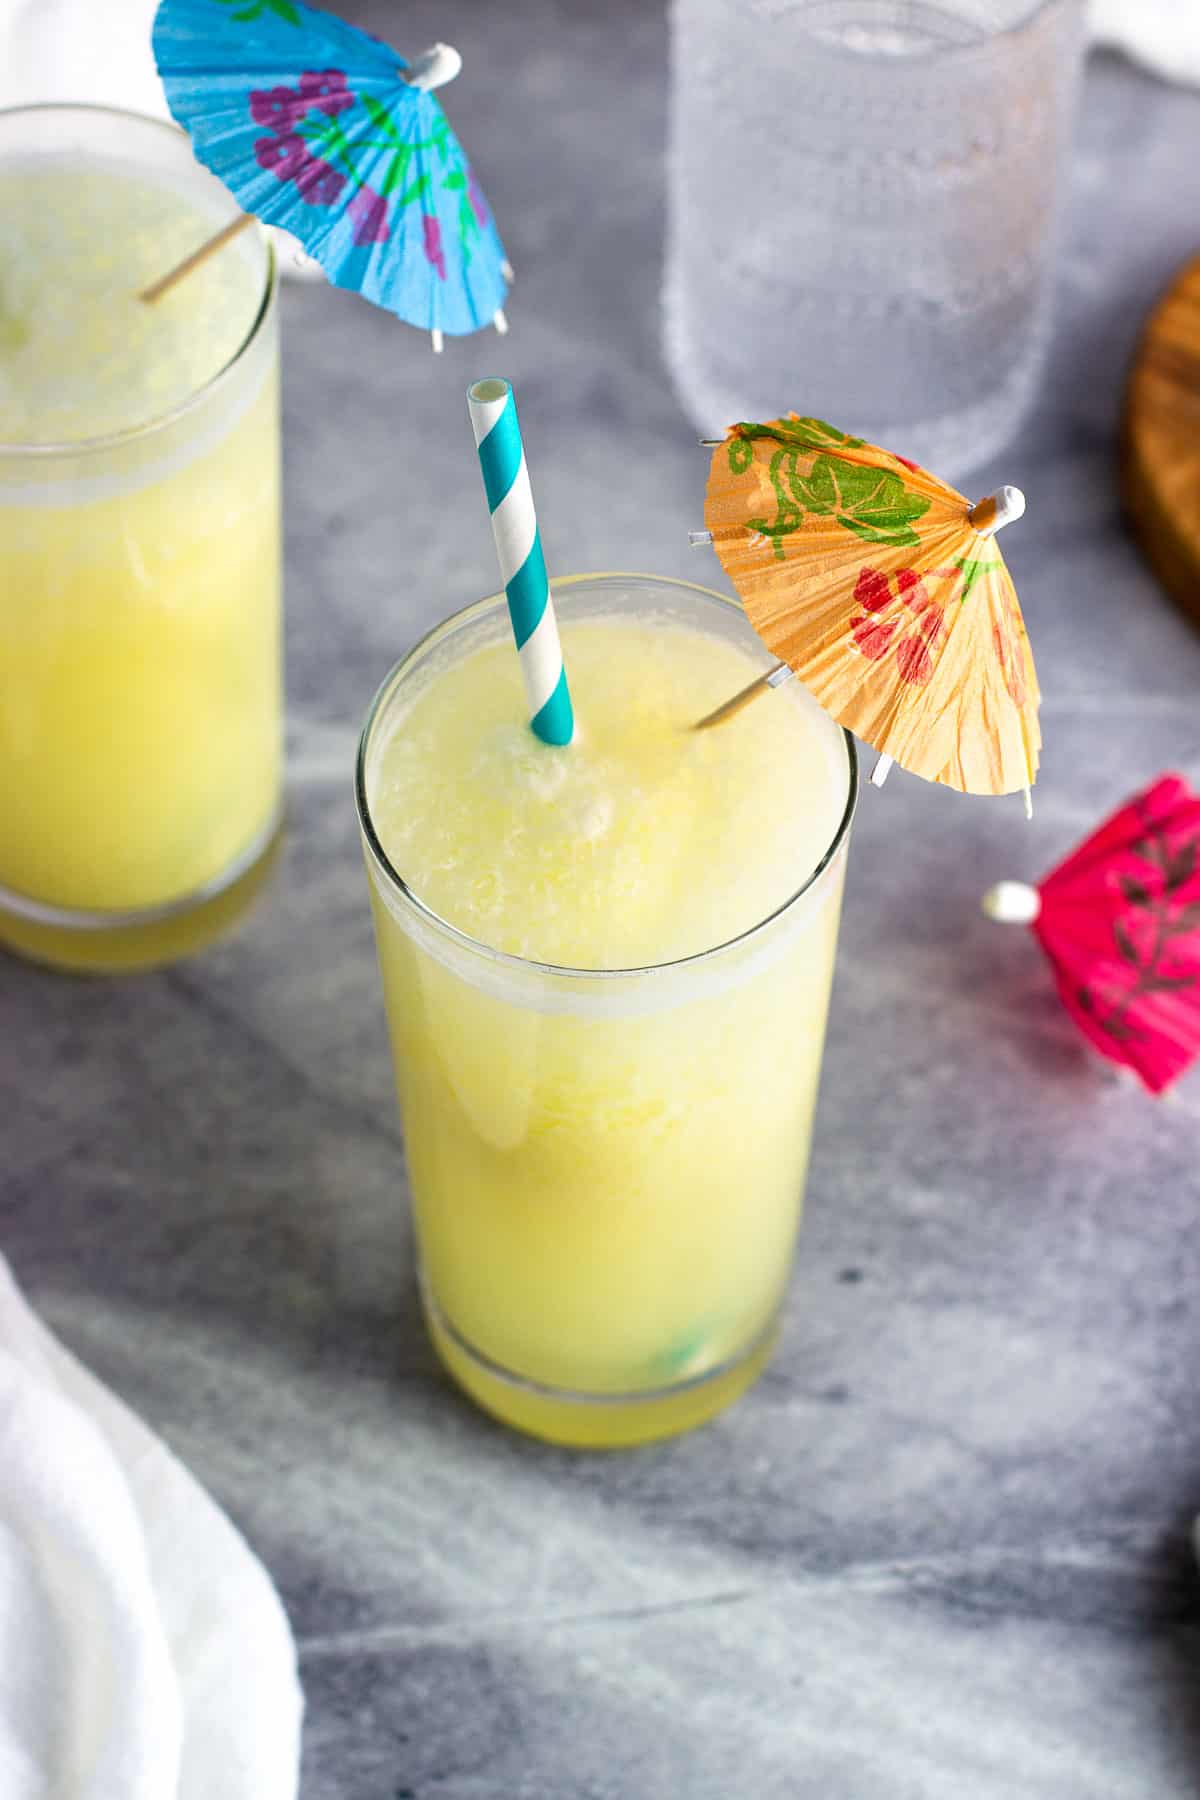 A pina colada mocktail in a glass with a straw and paper drink umbrella.